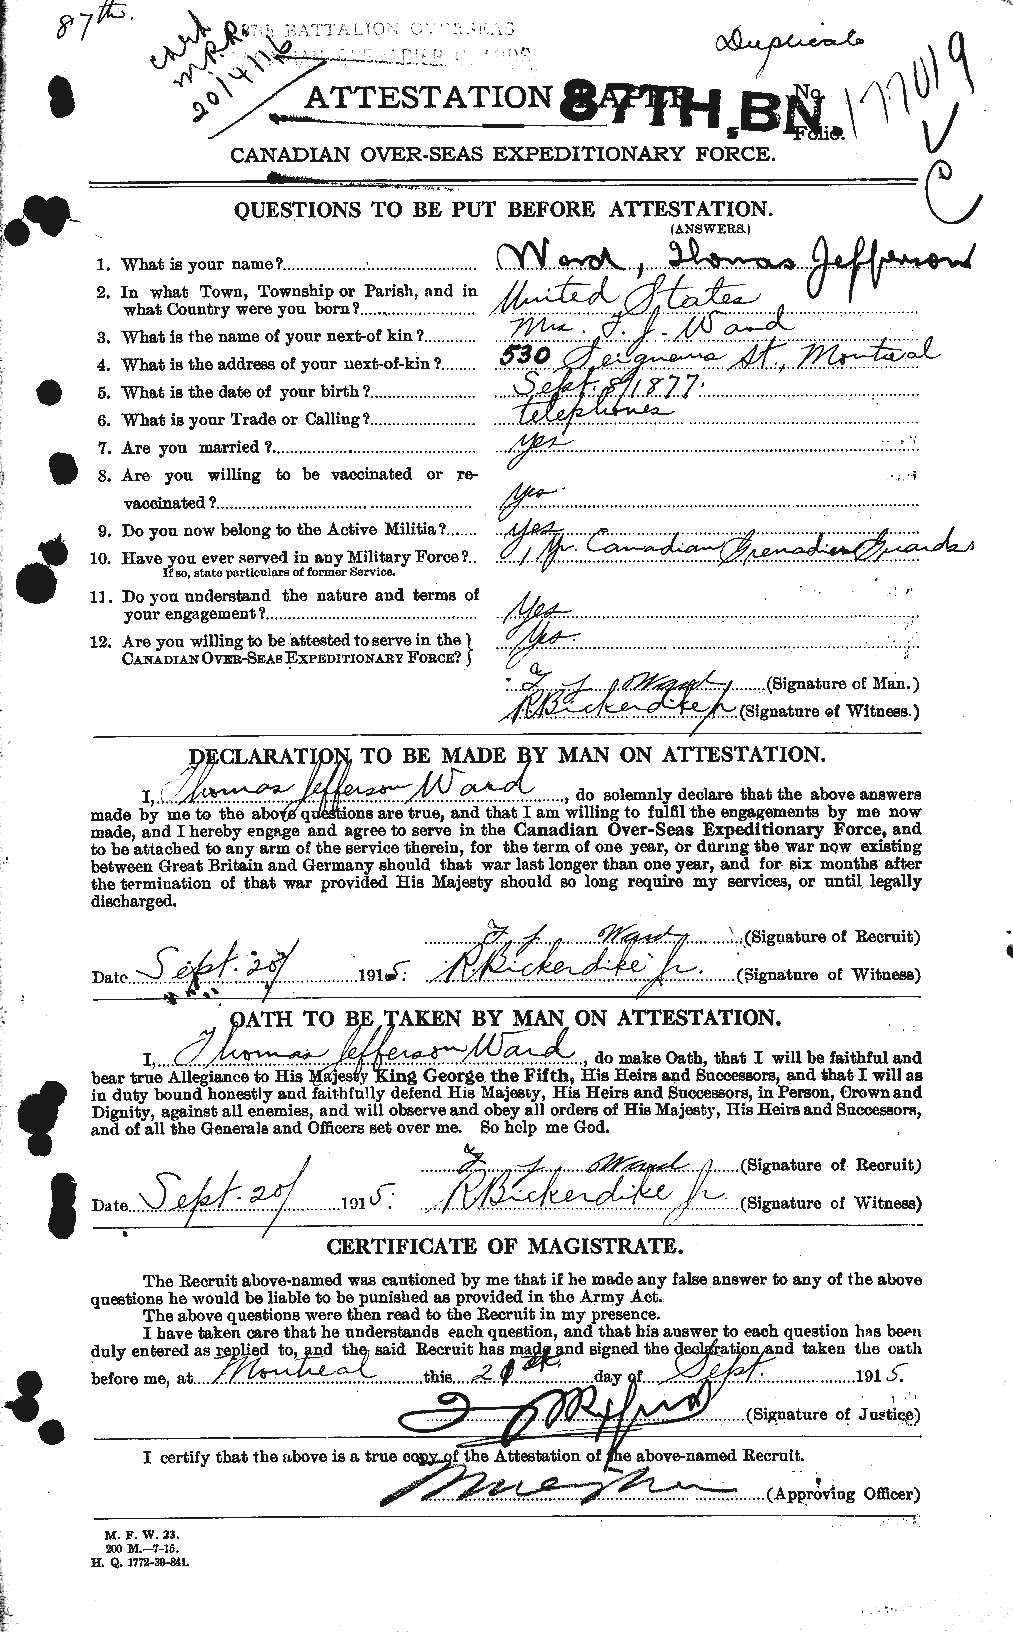 Personnel Records of the First World War - CEF 659729a